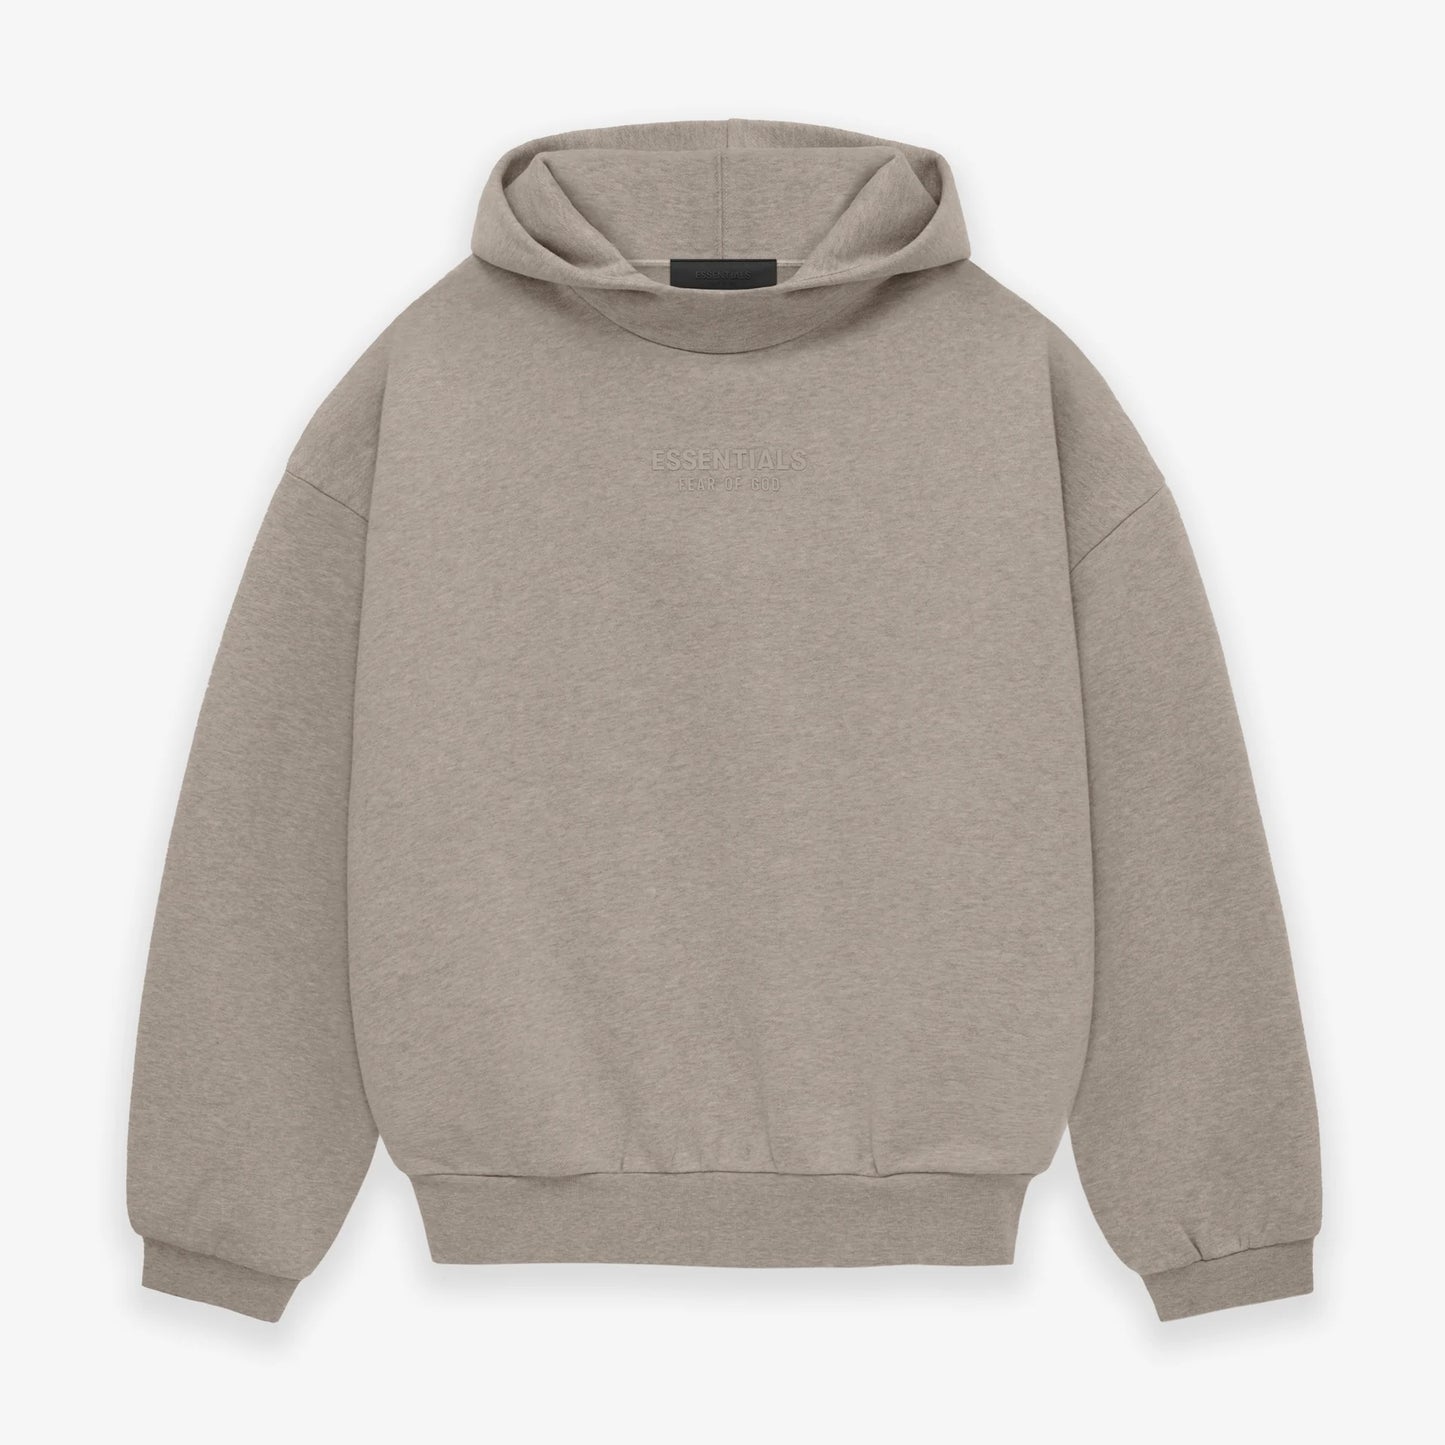 Fear of God Essentials Core Heather Hoodie Front VIew